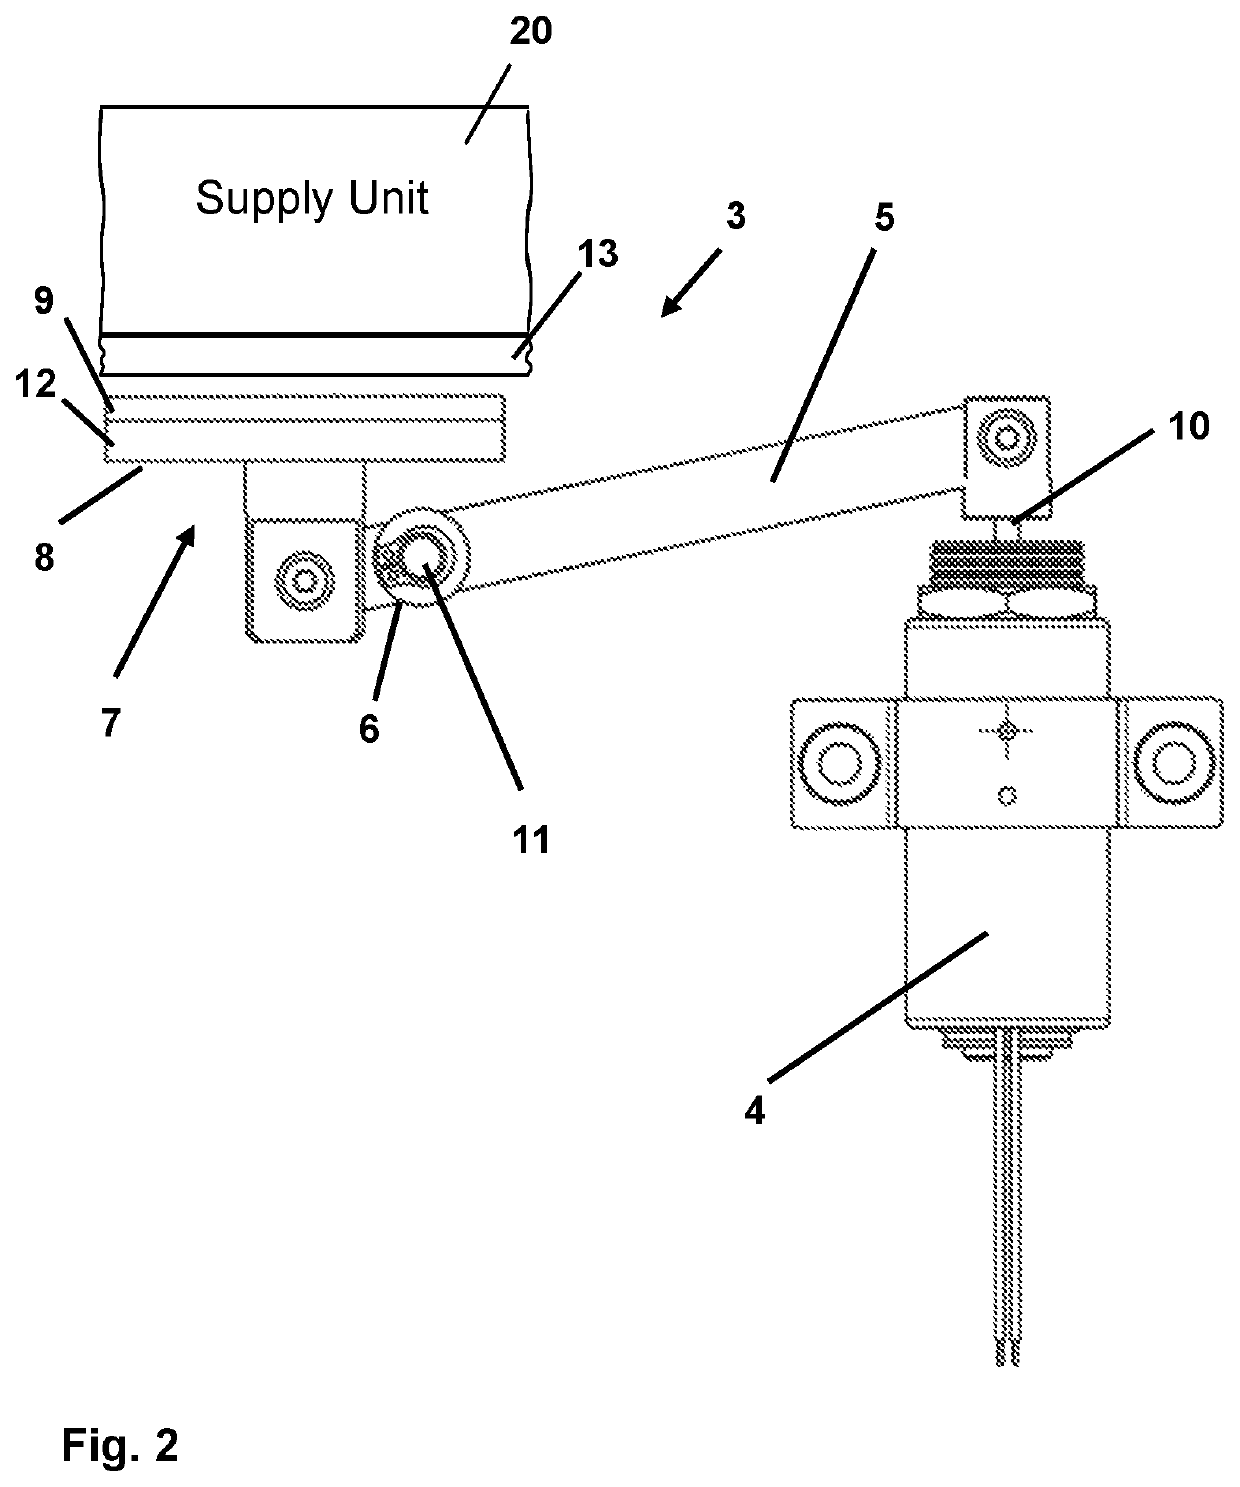 Beam-mounted supply unit for fastening medical devices to a ceiling